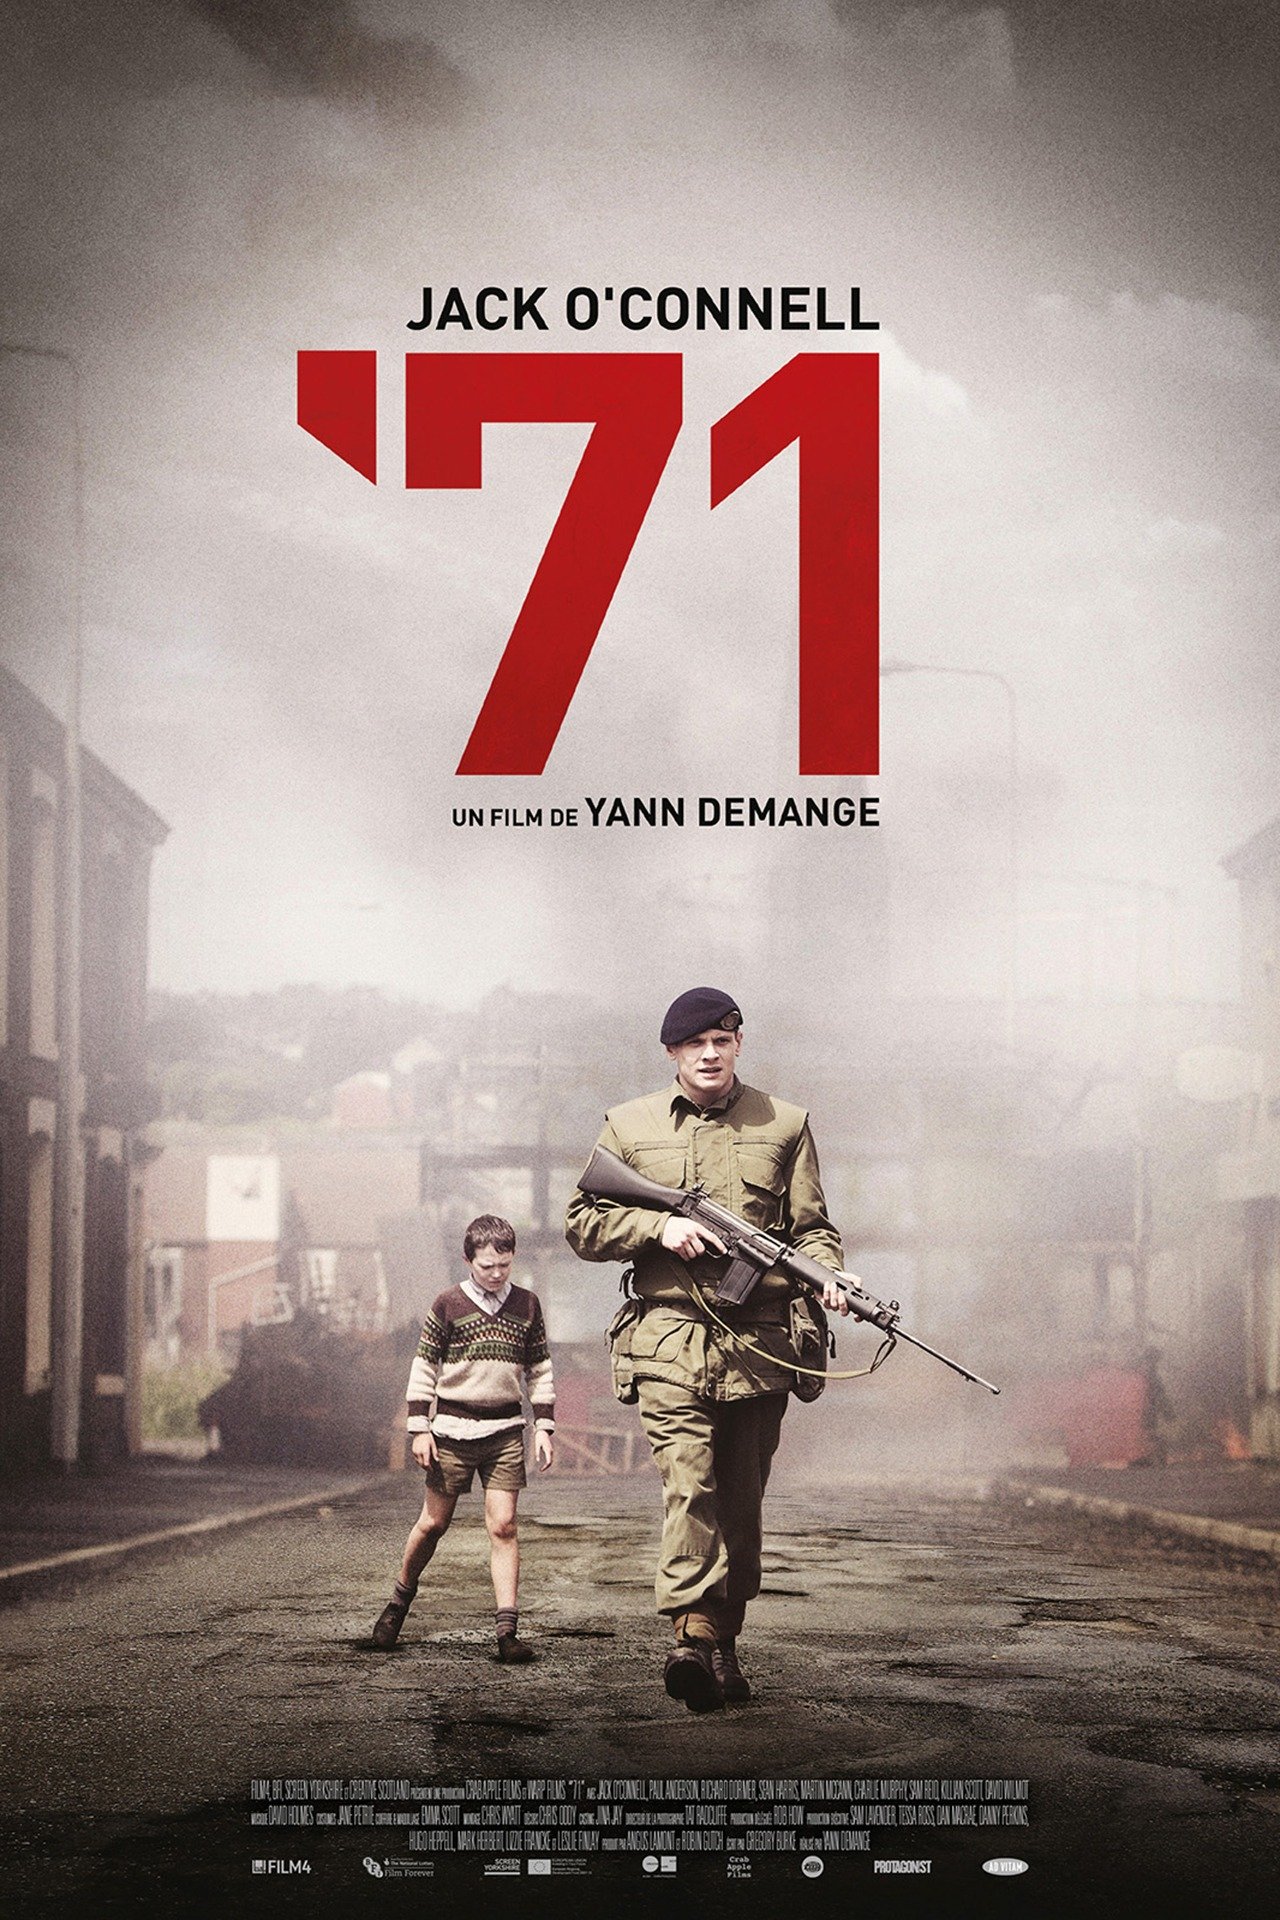 71: Trailer 1 - Trailers & Videos - Rotten Tomatoes